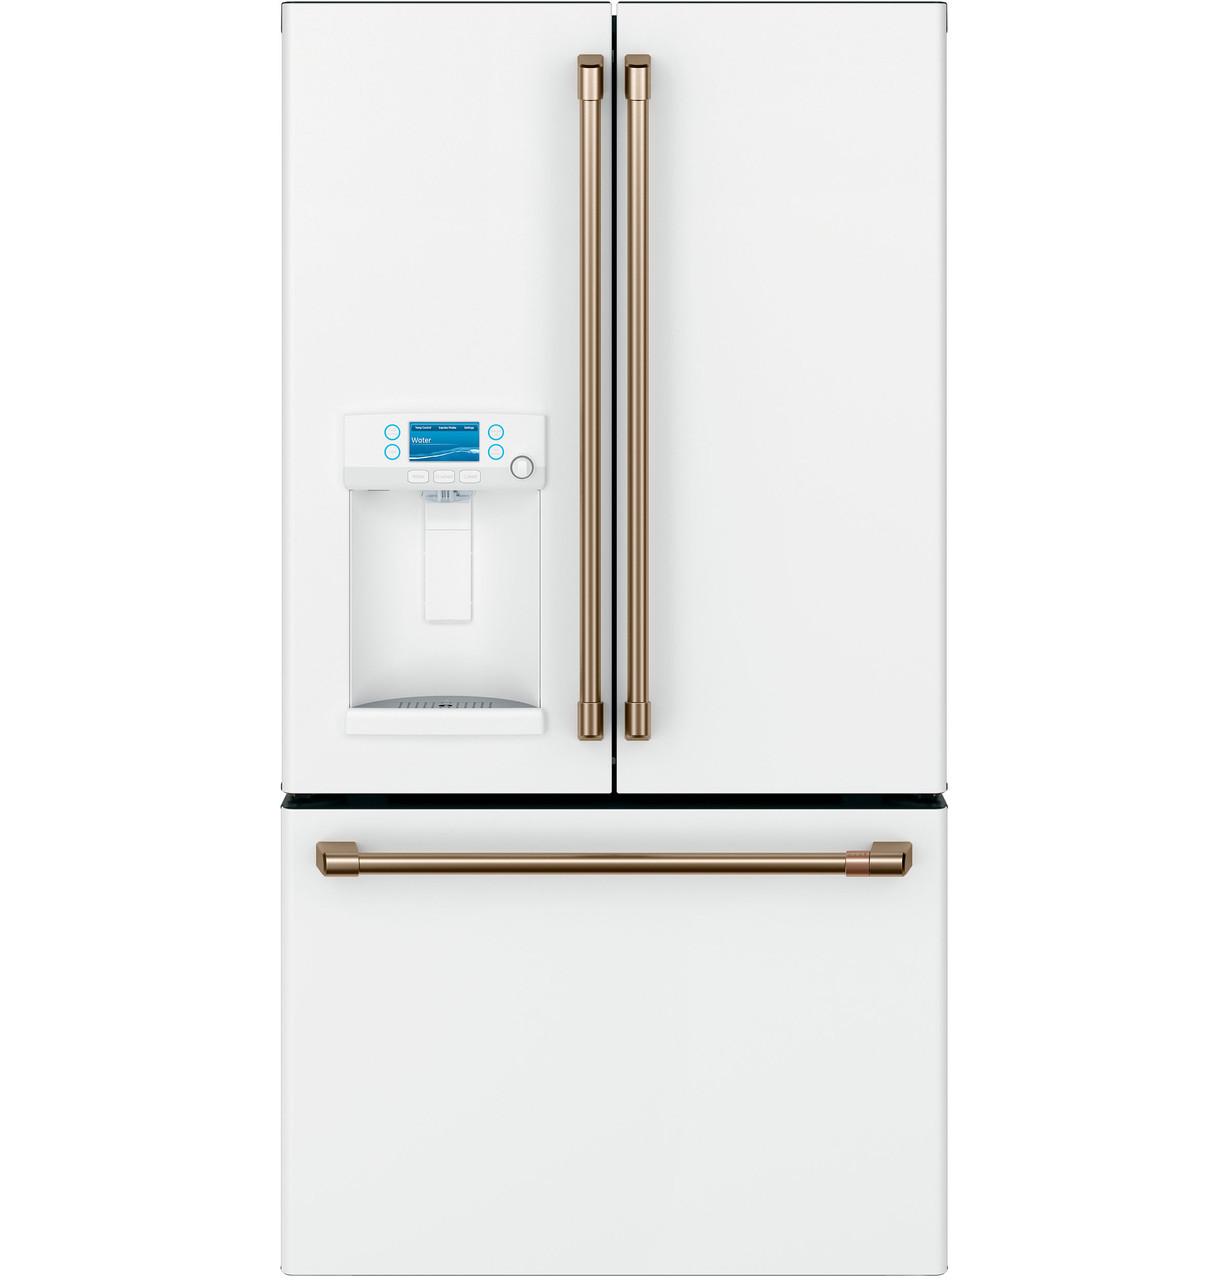 Cafe Cye22tpm 36" Wide 22.2 Cu. Ft. Counter Depth French Door Refrigerator - Matte White / - image 1 of 5